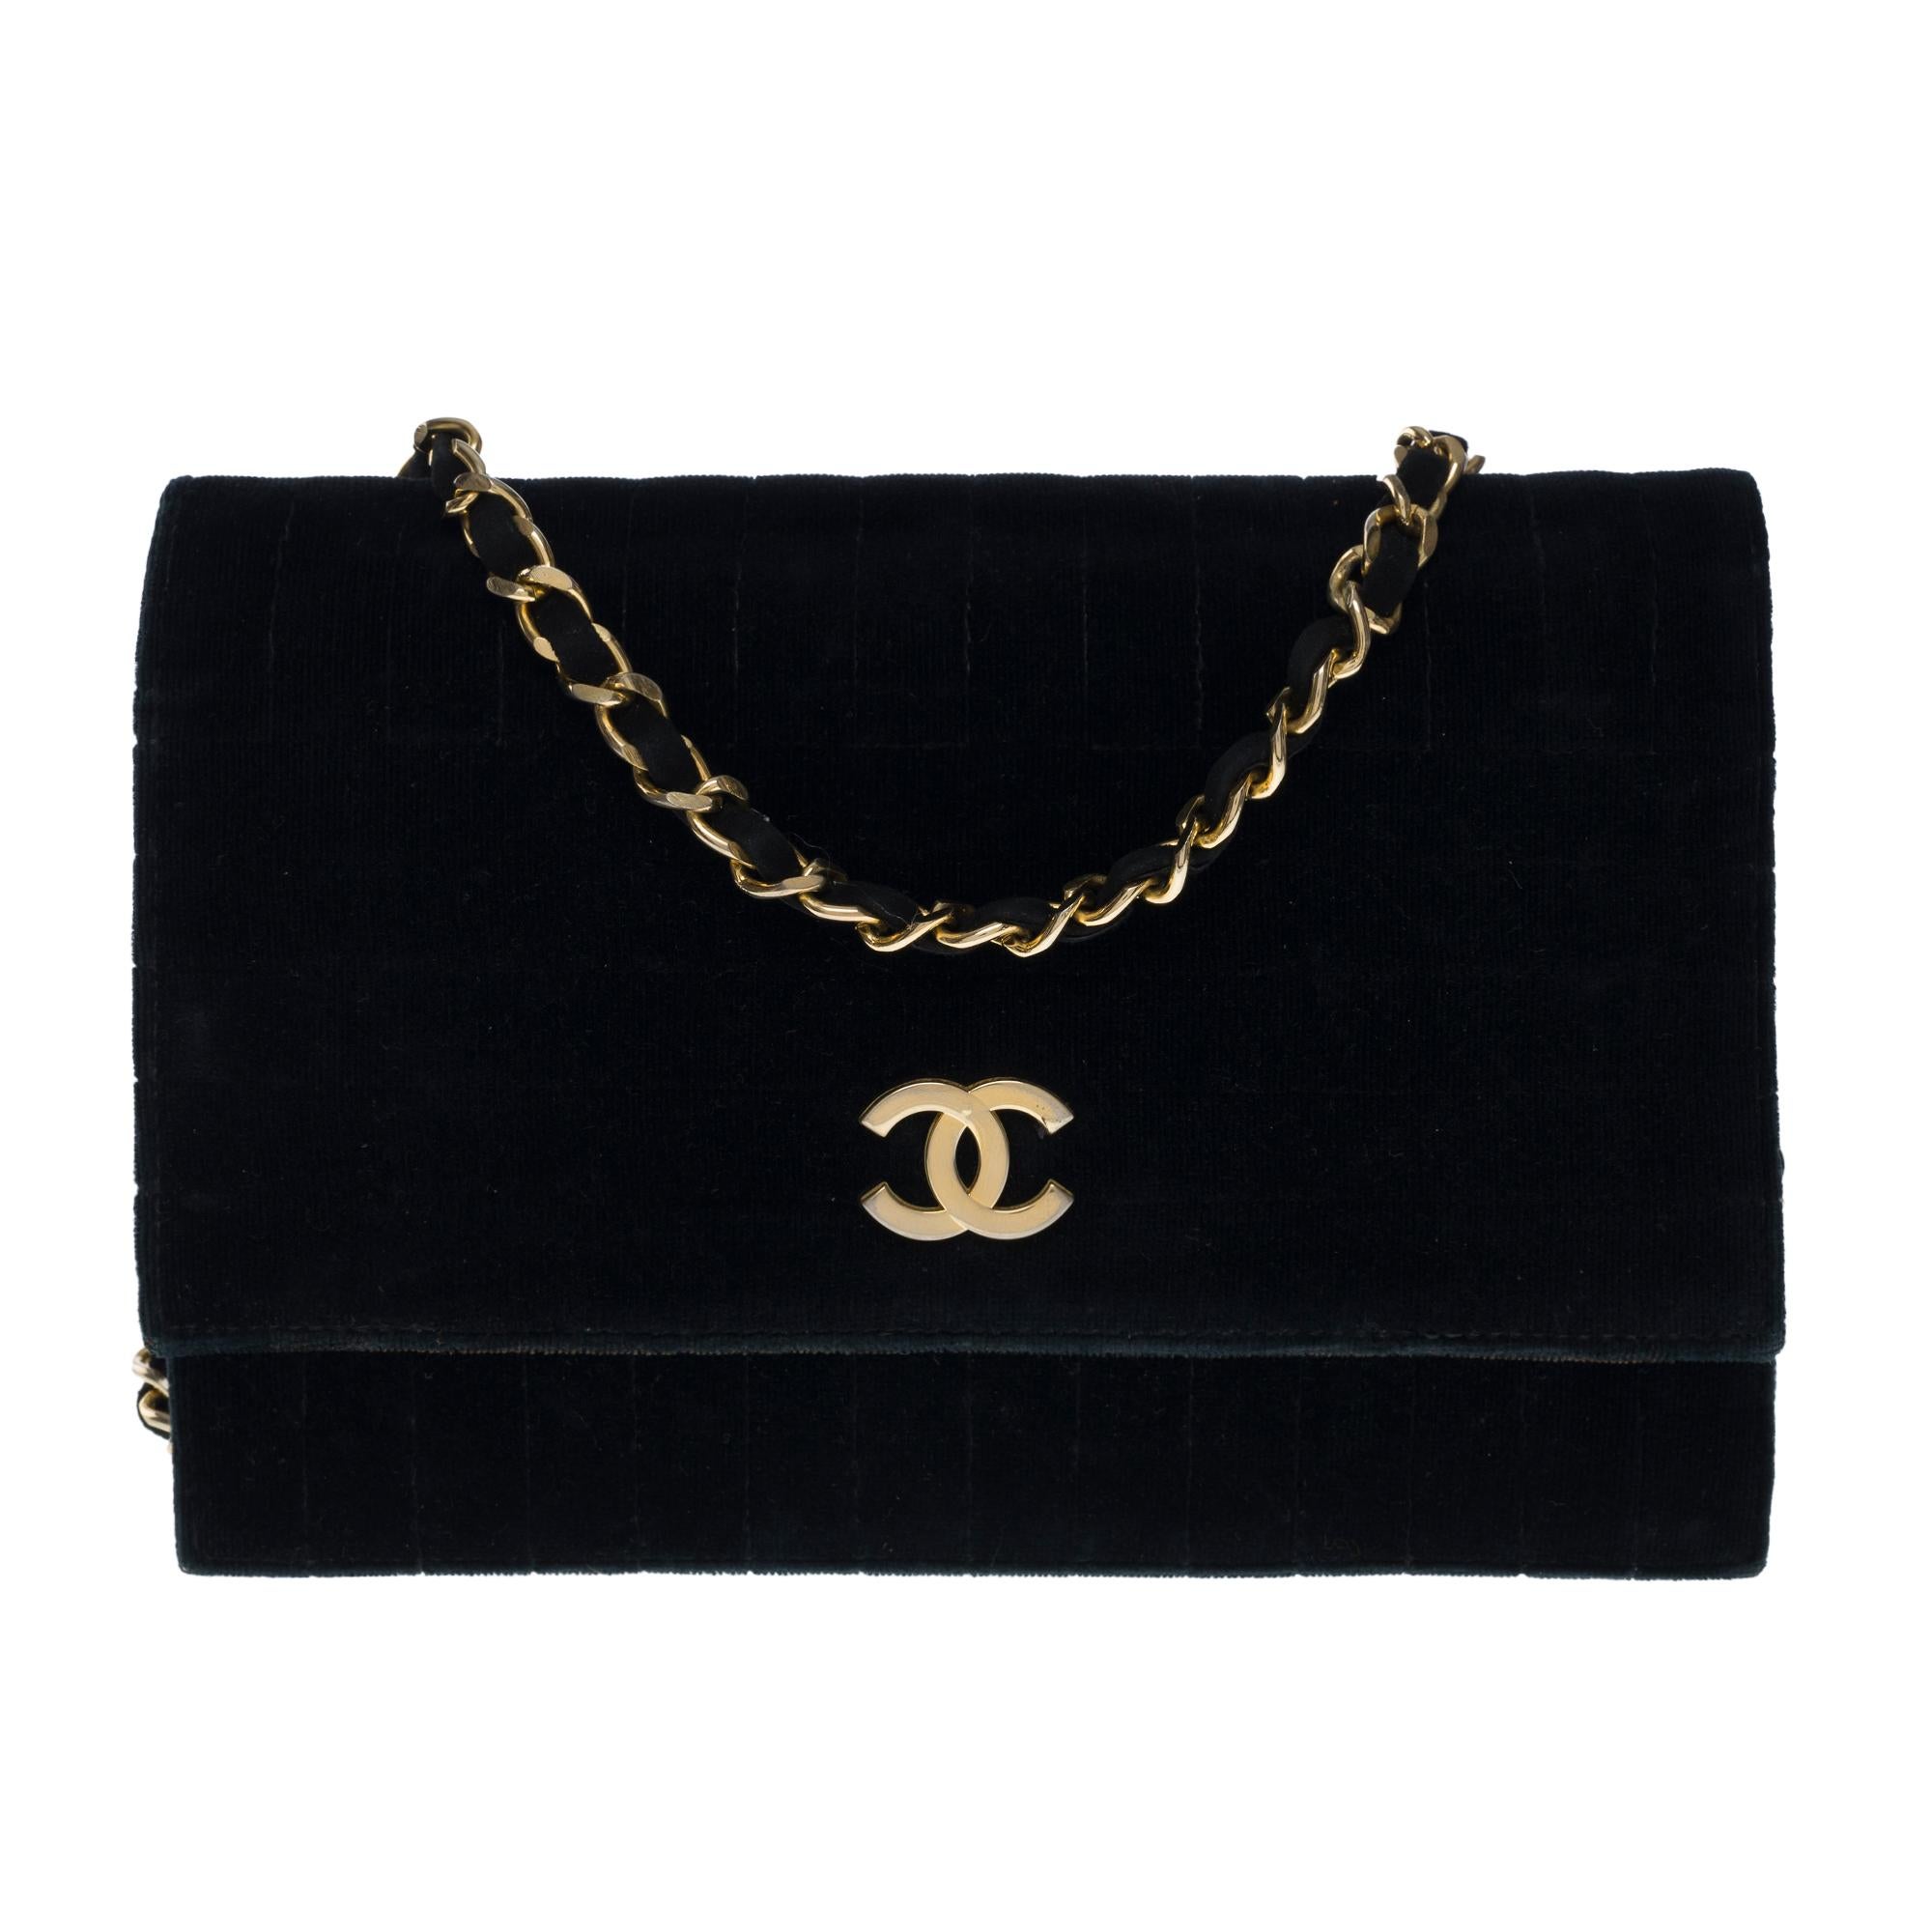 Rare Chanel Classic shoulder flap bag in black velvet, gold-plated metal hardware, a gold-plated metal chain handle interwoven with black velvet for a hand or shoulder support

Gold metal flap closure
Black fabric lining, 1 zippered